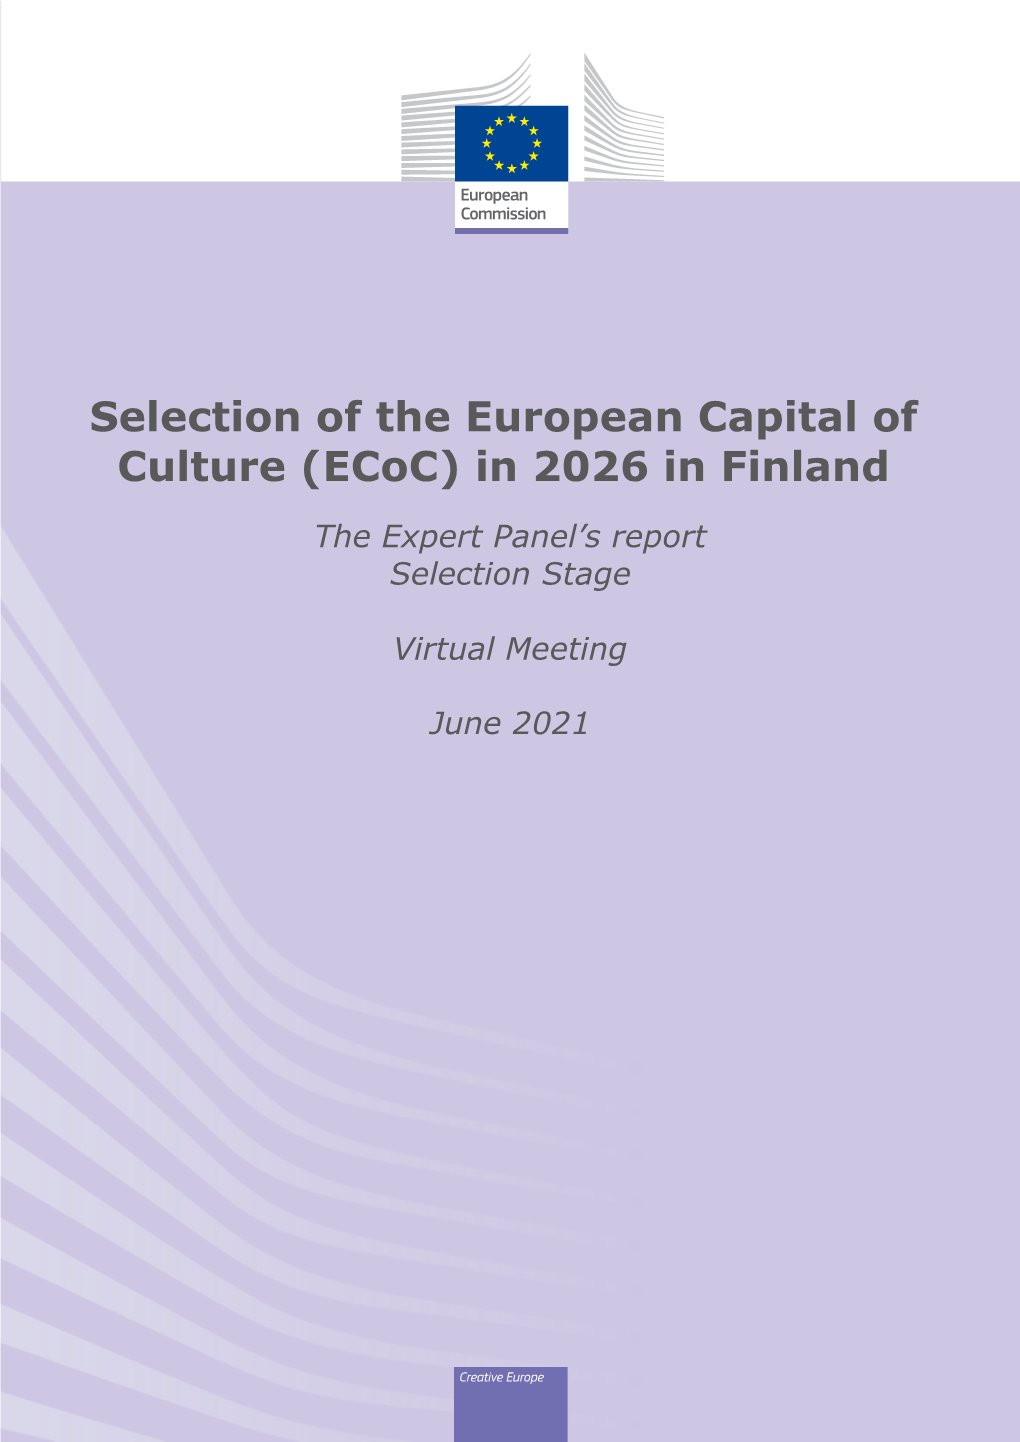 Selection of the European Capital of Culture (Ecoc) in 2026 in Finland